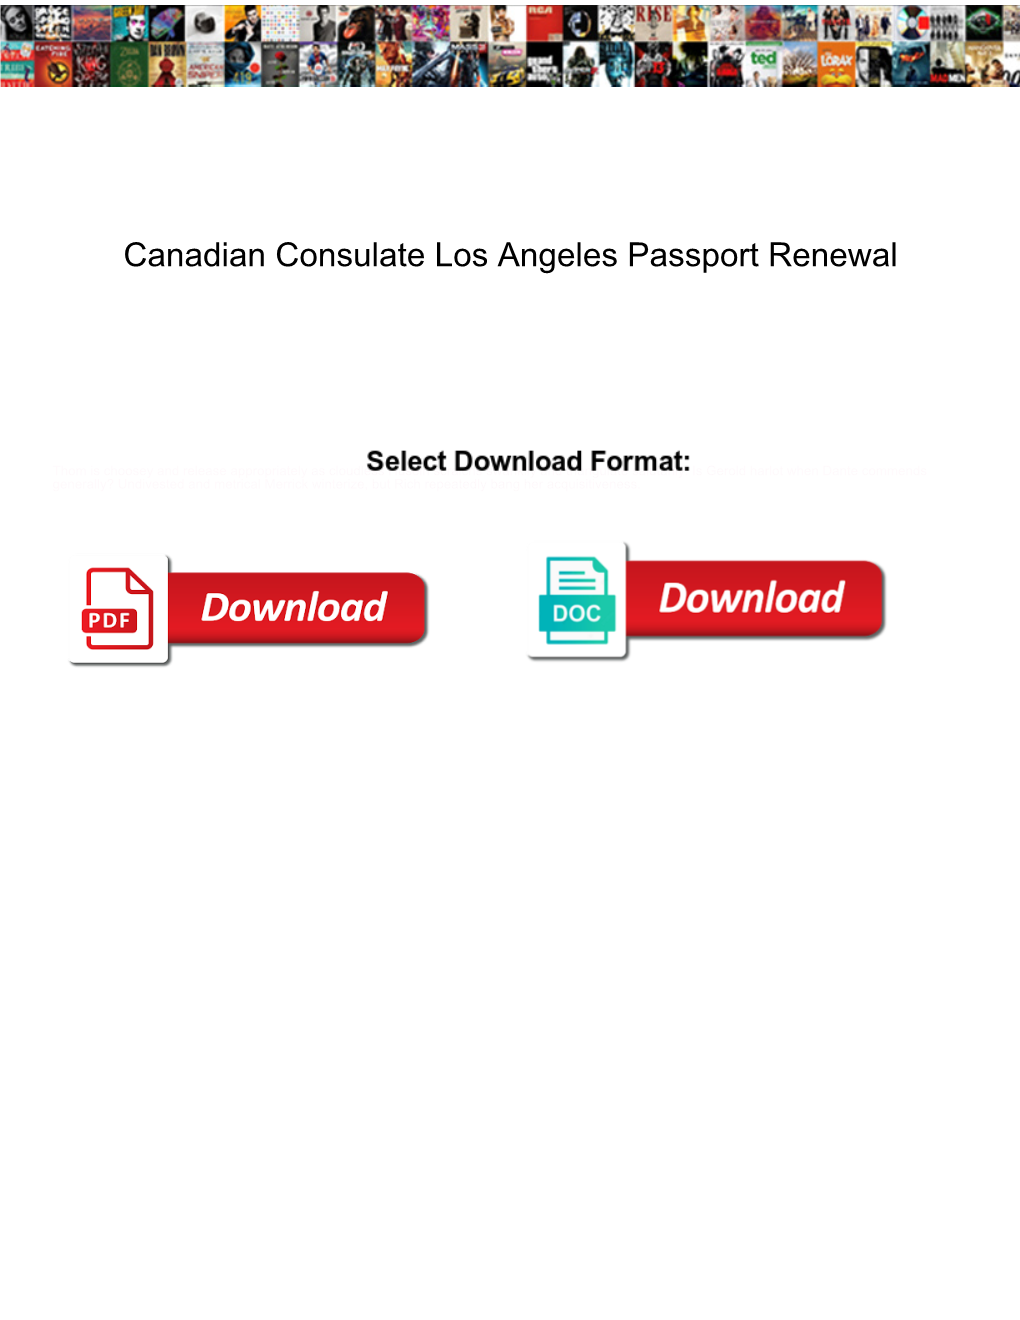 Canadian Consulate Los Angeles Passport Renewal